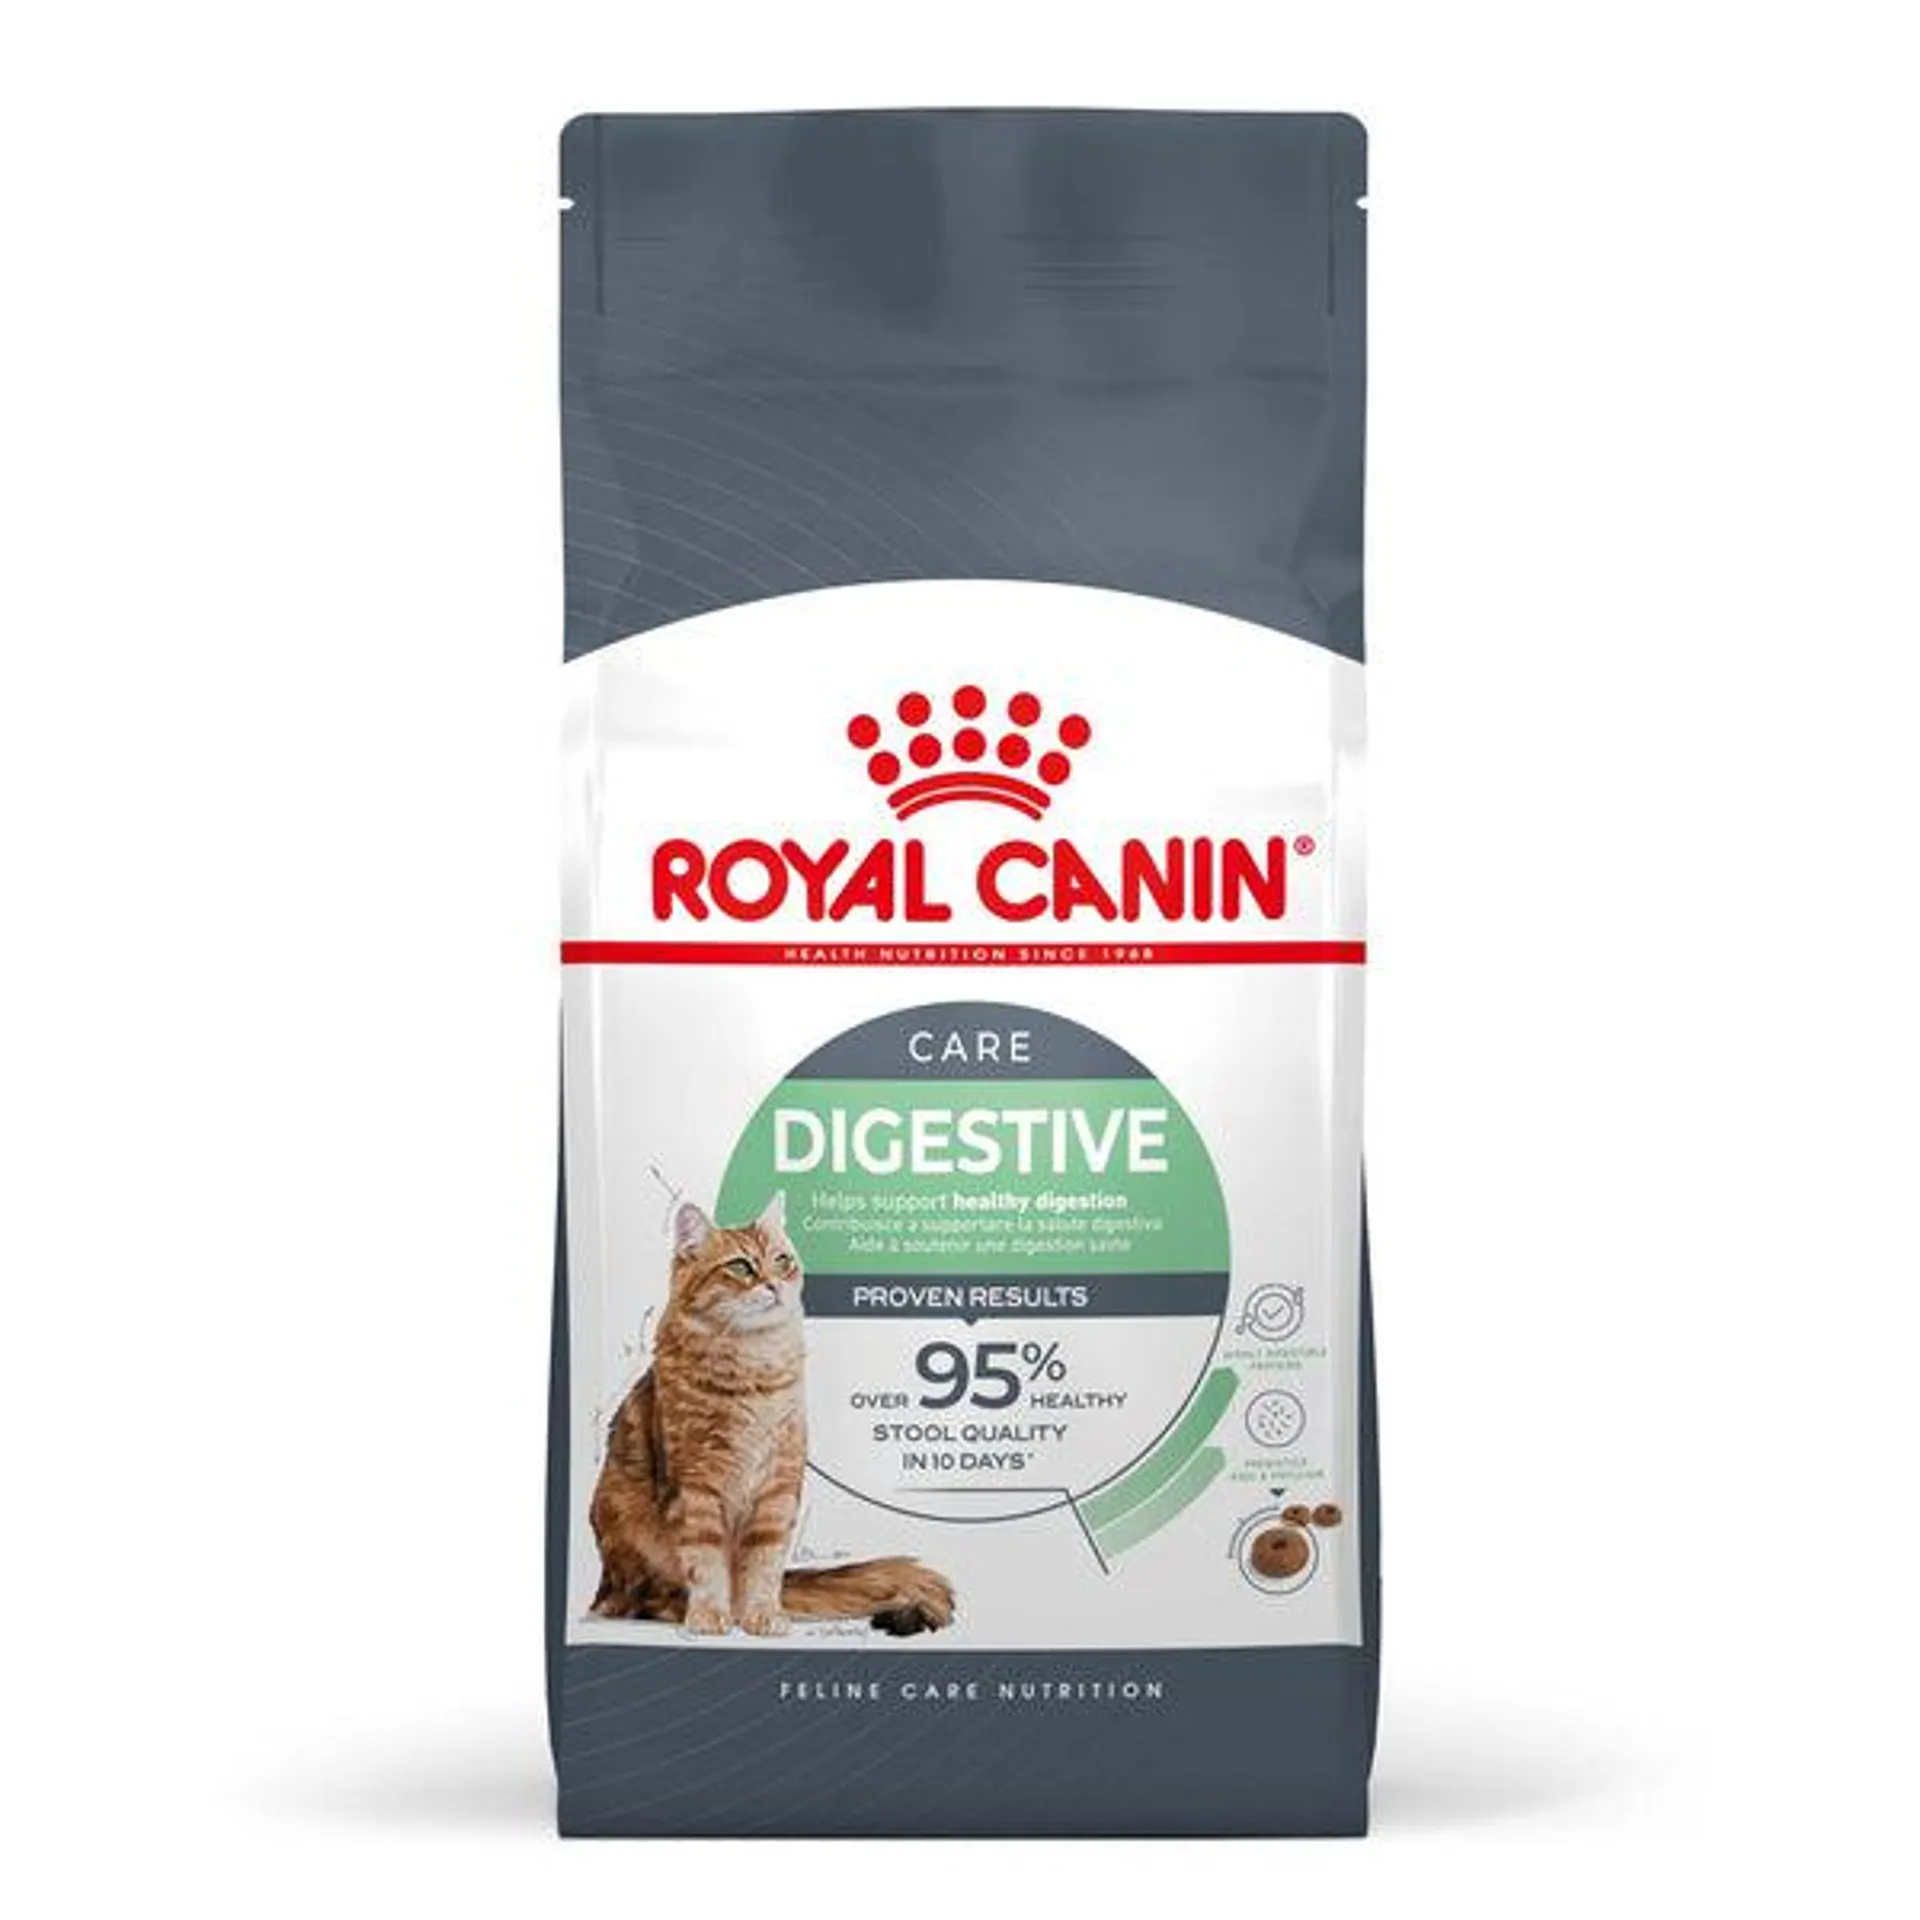 Royal Canin - Digestive Care Adult Cat Dry Food (4kg)